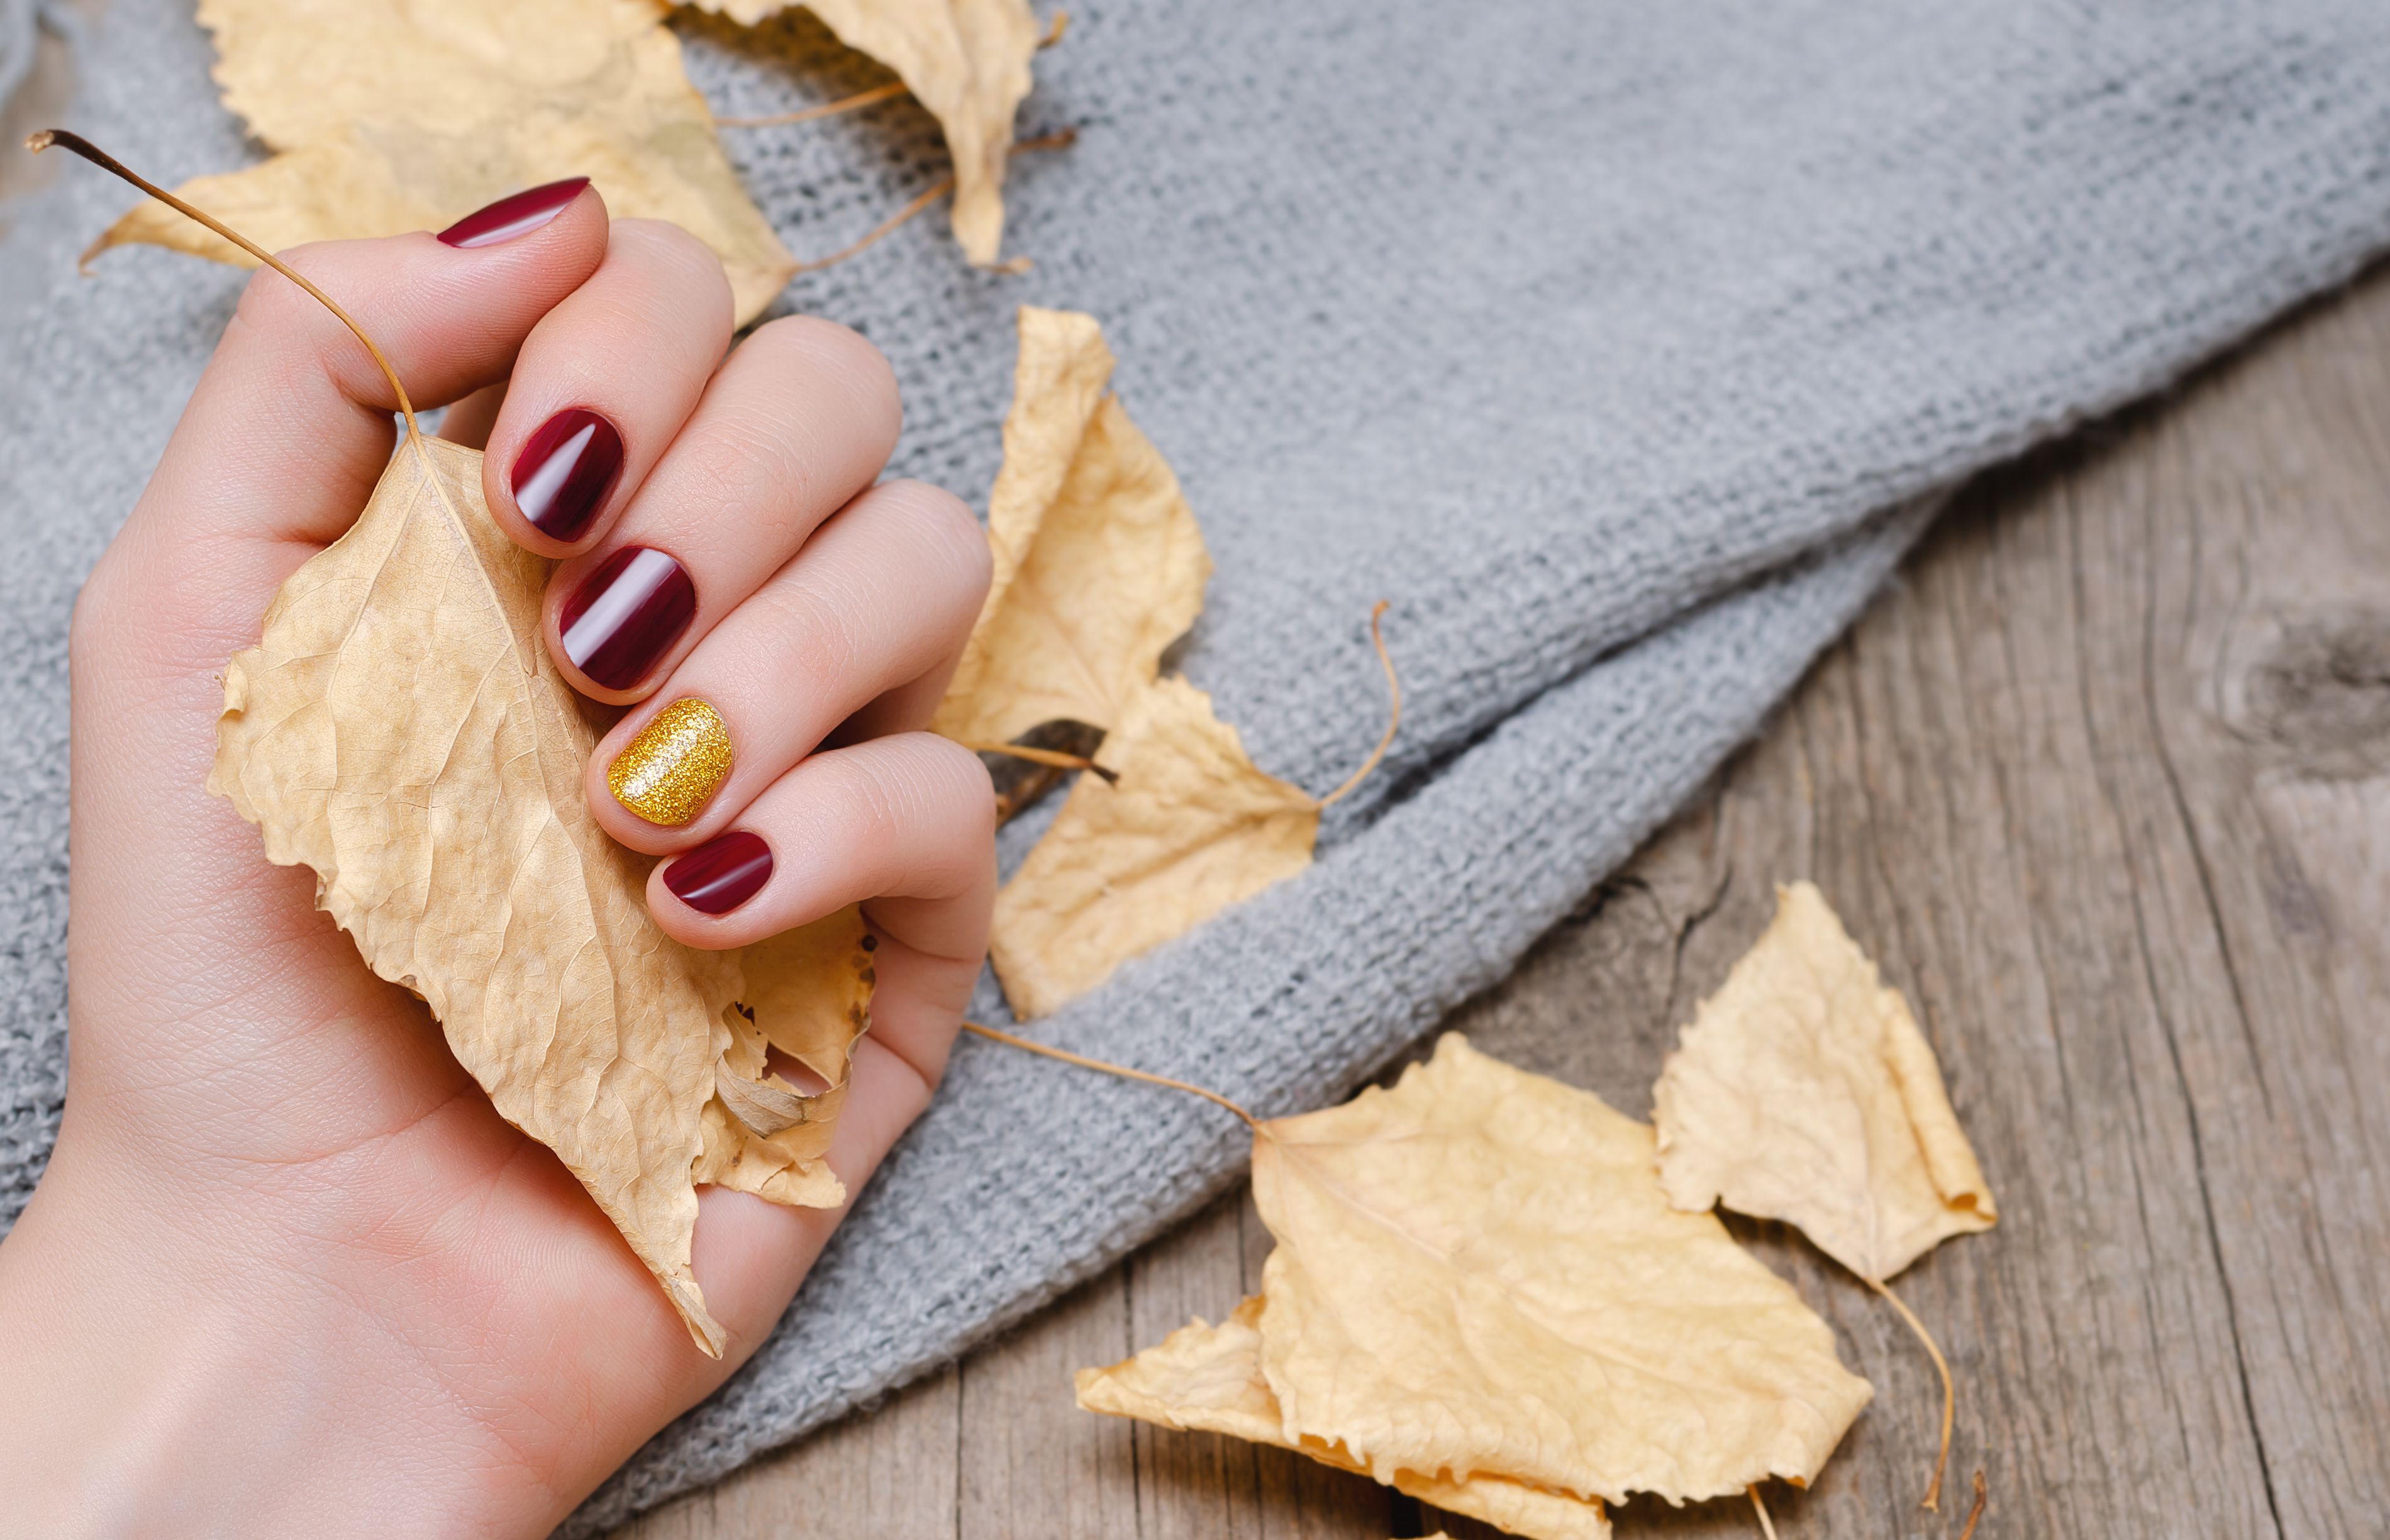 6. "Fall Nail Colors That Will Elevate Your Autumn Style" - wide 7